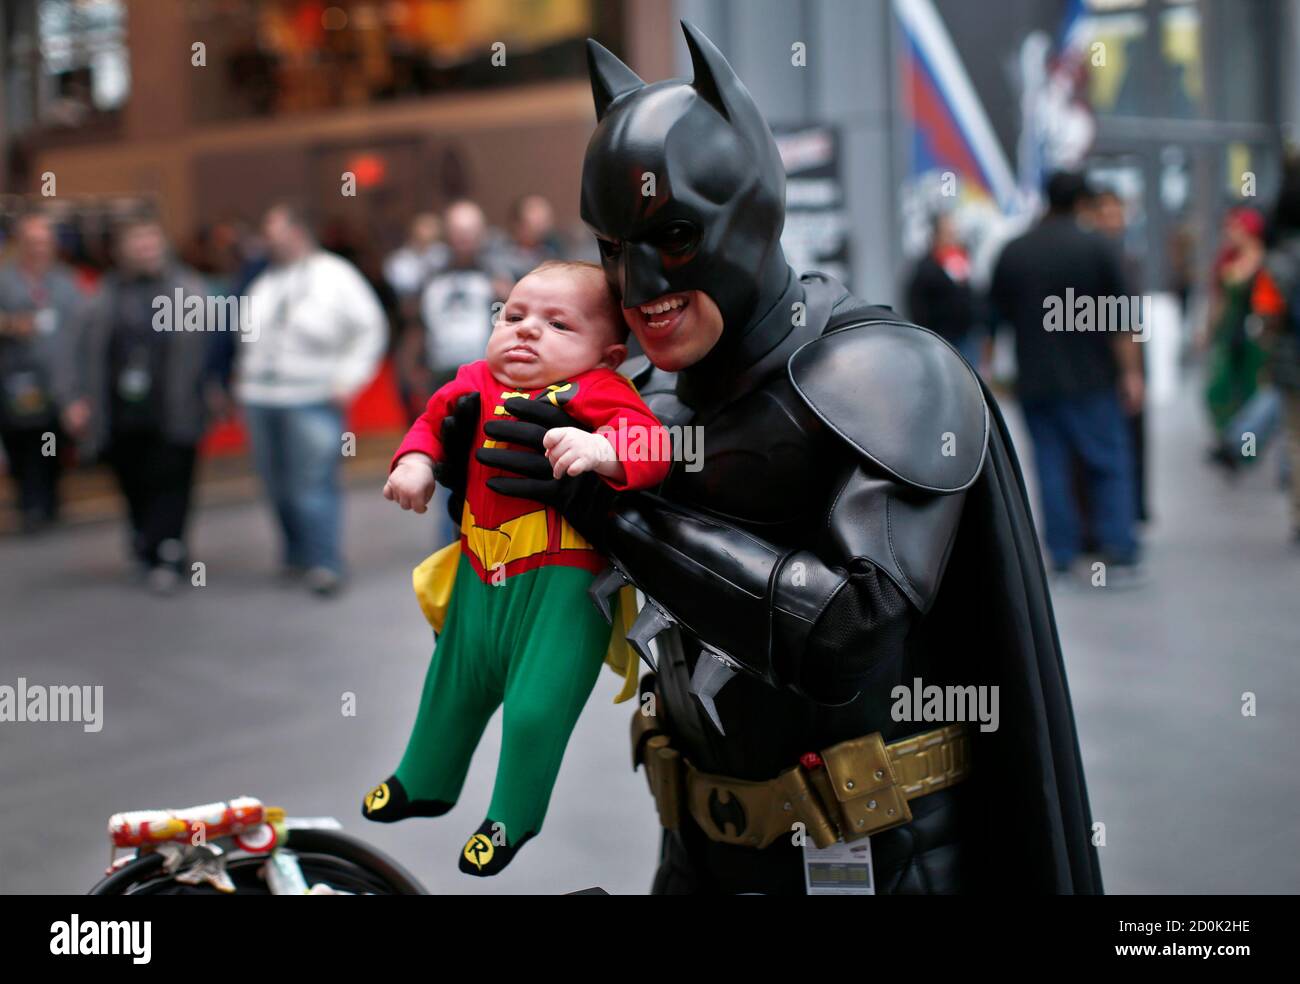 A man in a Batman costume holds up an infant dressed as Robin at New York's  Comic-Con convention October 11, 2013. The event draws thousands of  costumed fans, panels of pop culture